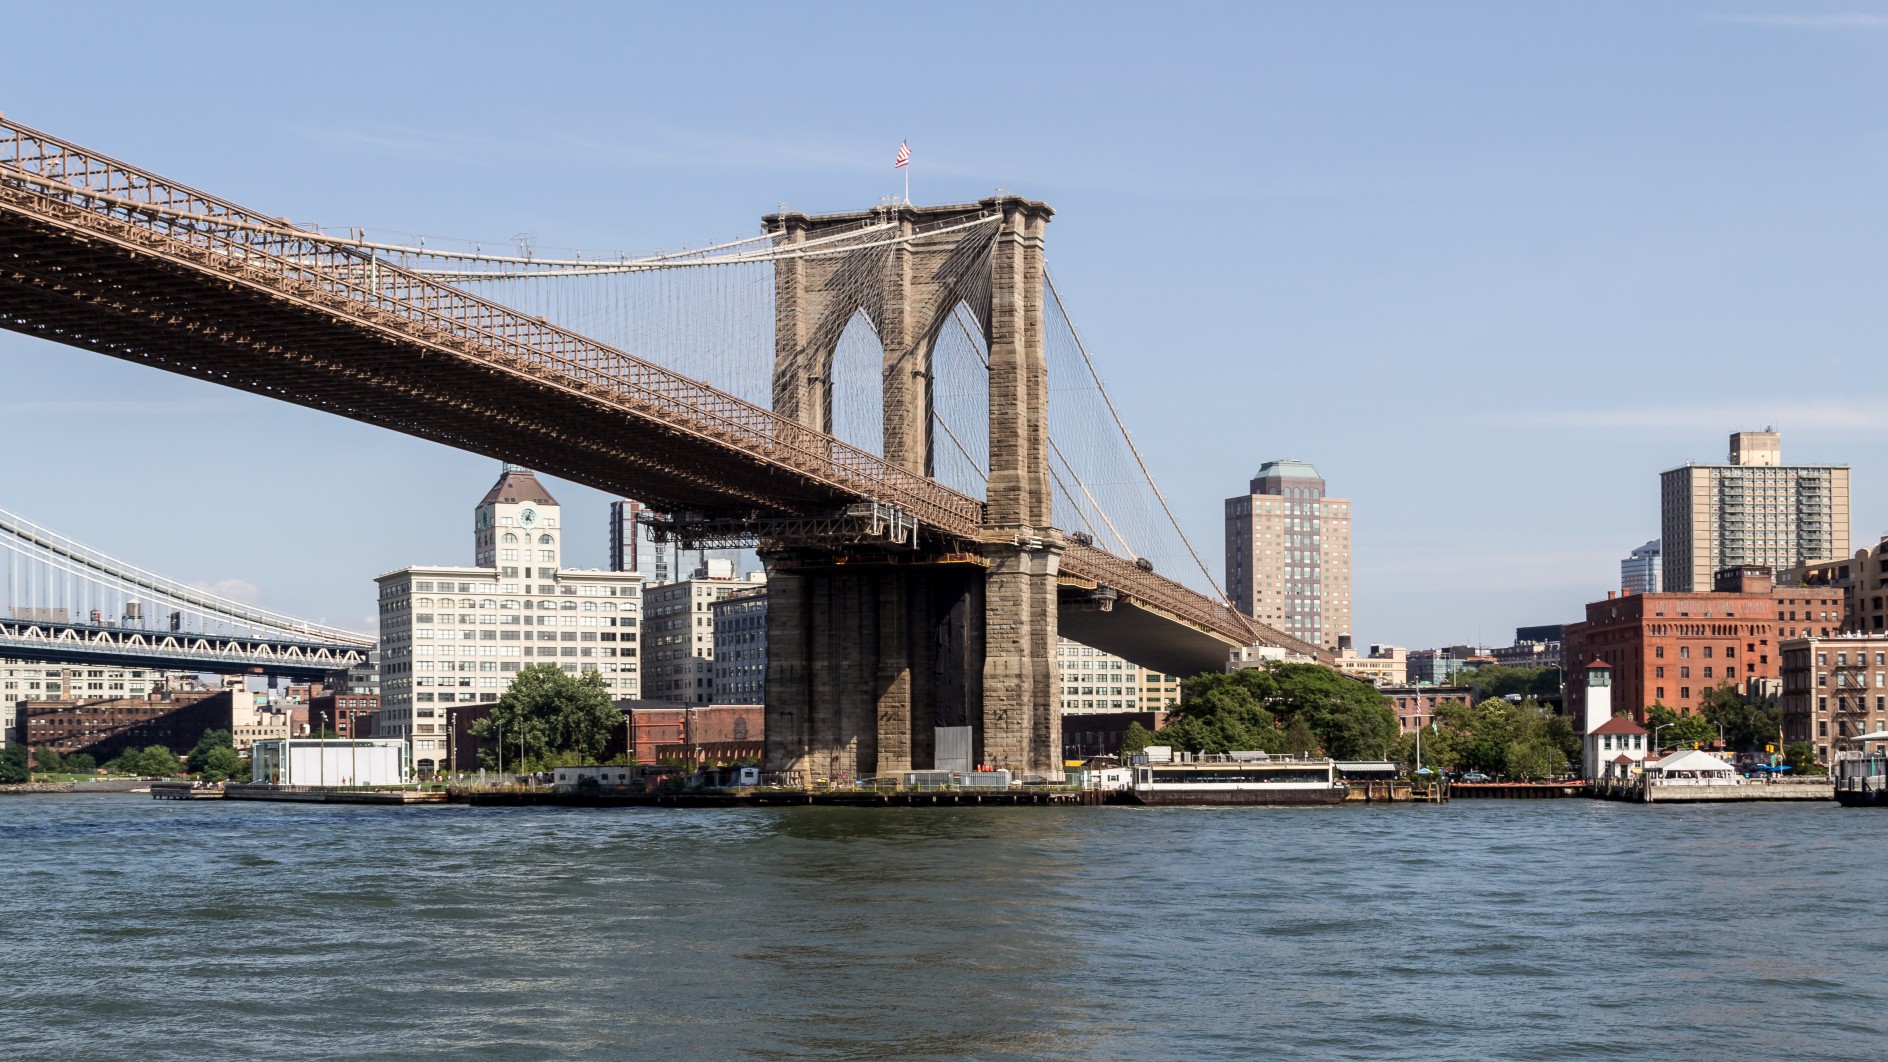 The Brooklyn Bridge in New York City crossing the East River